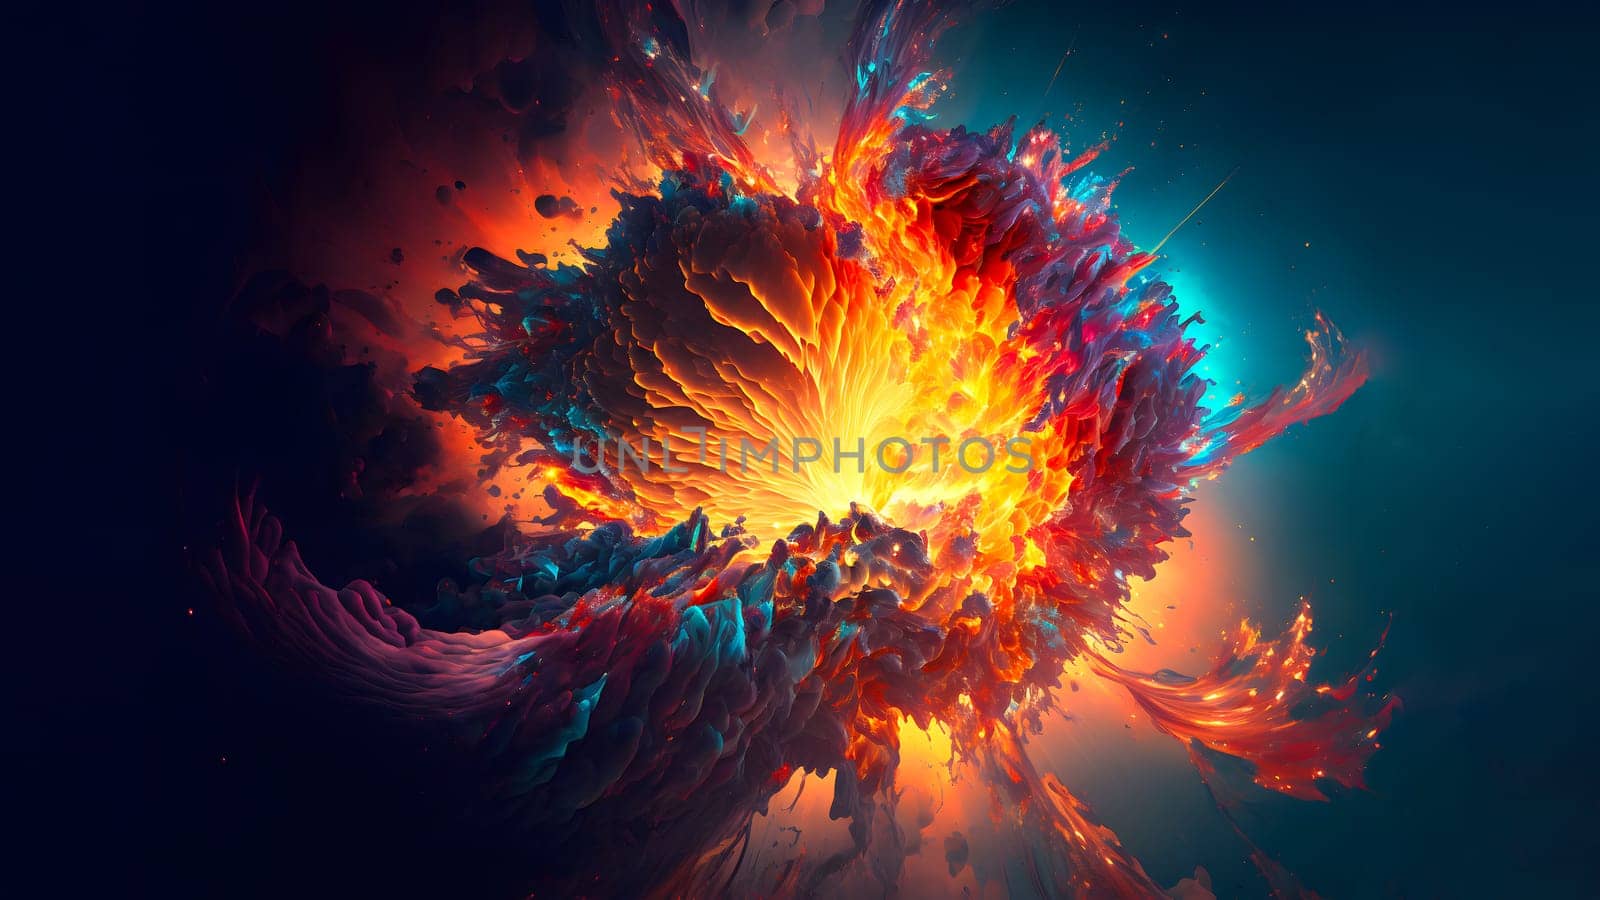 abstract colorful explosion on black background, neural network generated art by z1b